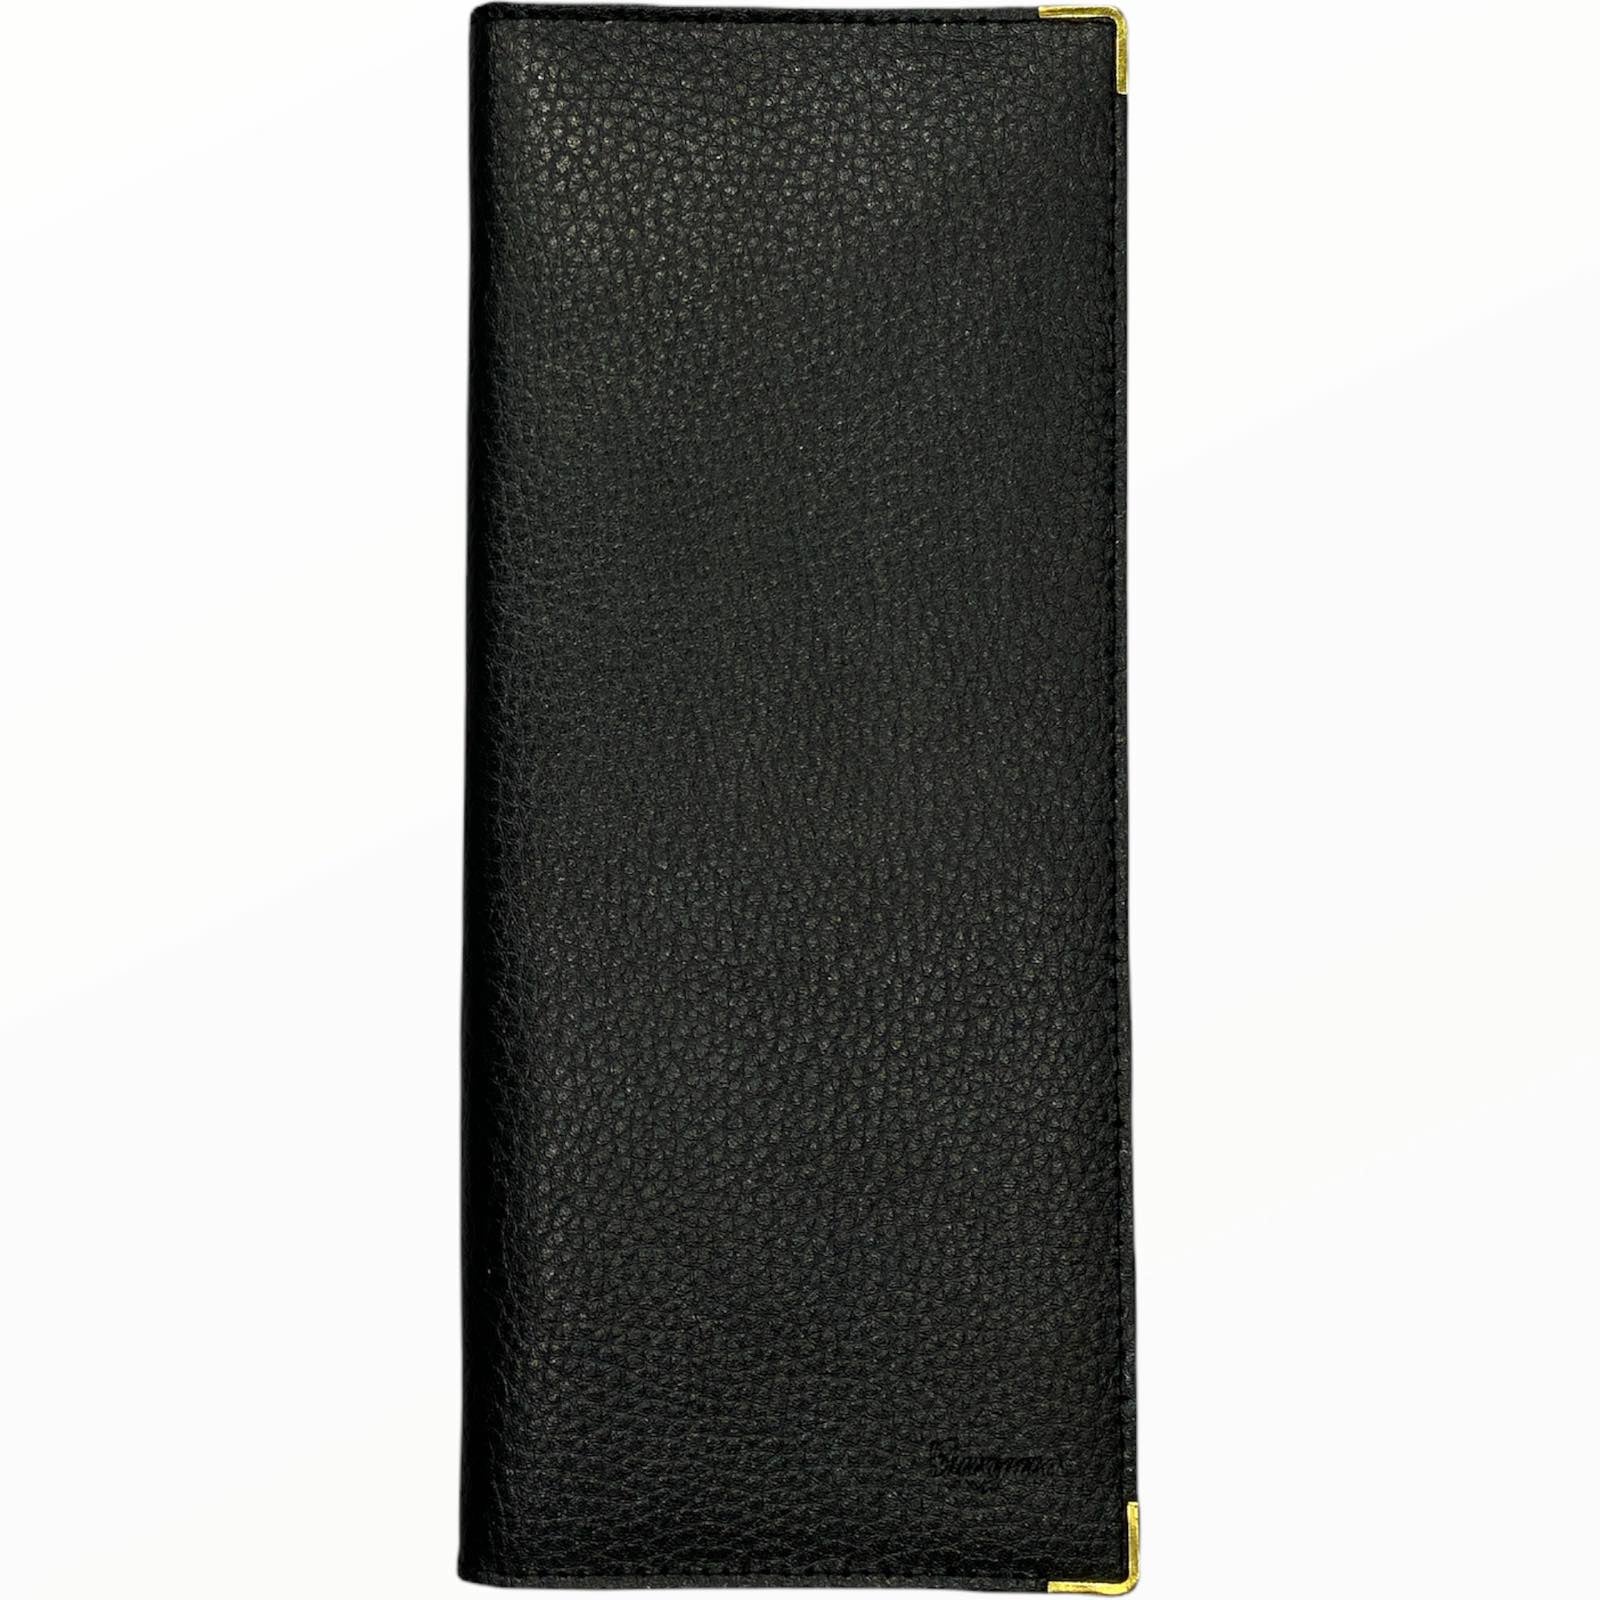 Black leather boarding pass wallet